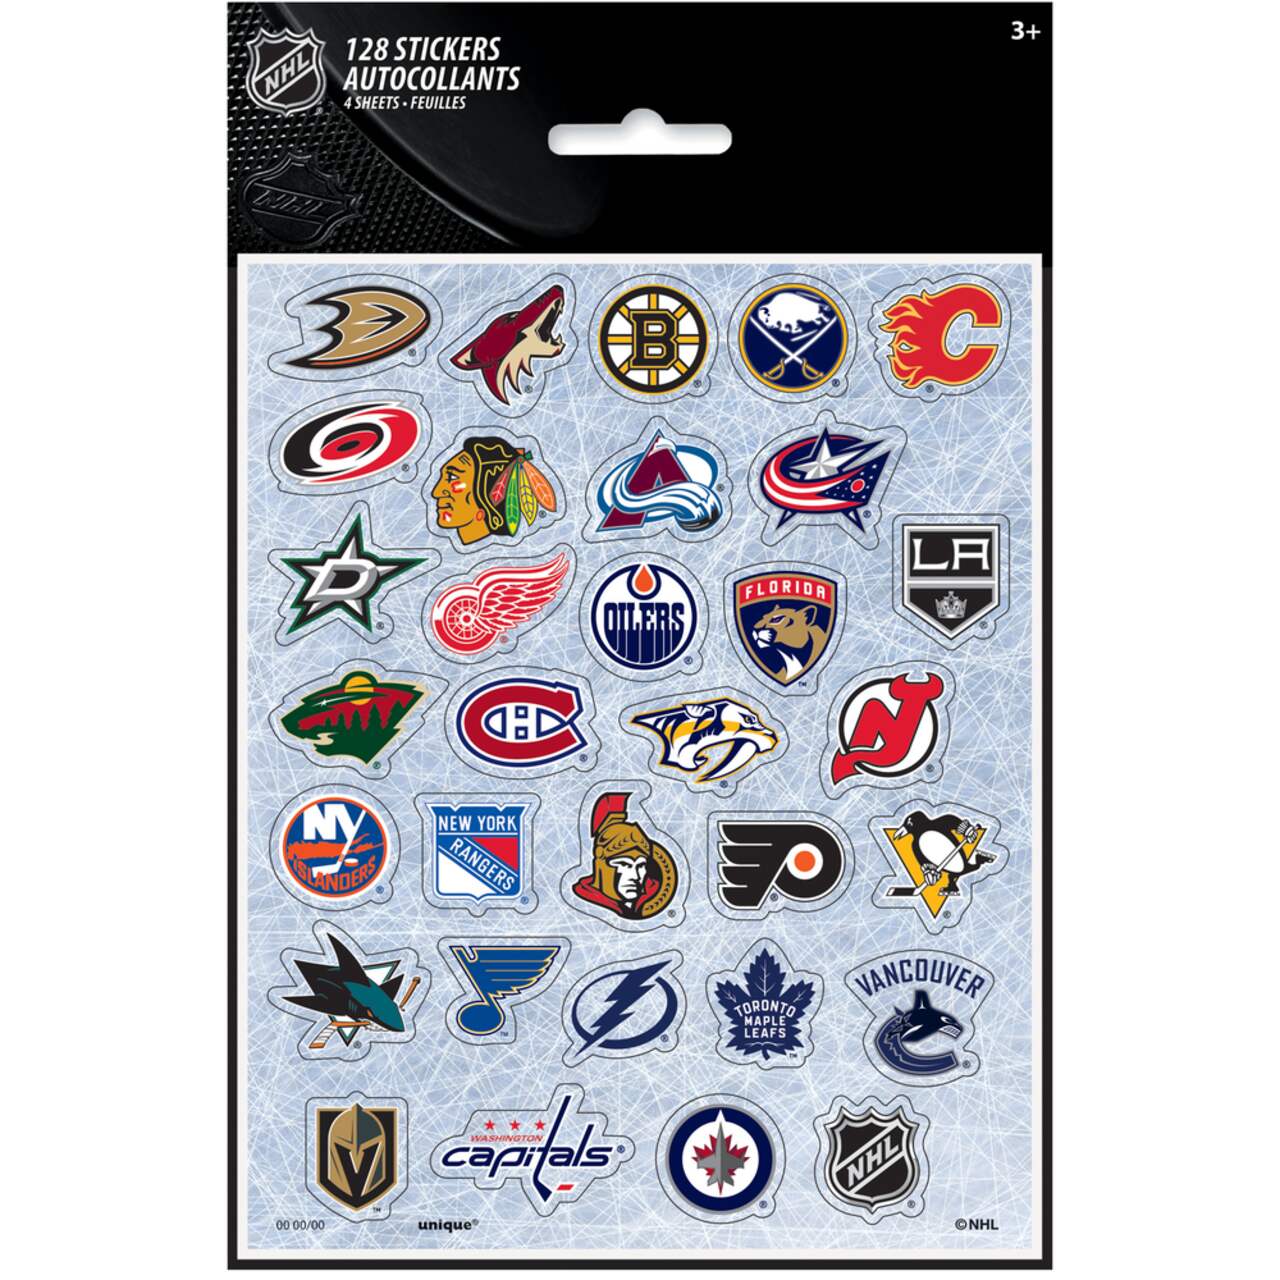 https://media-www.canadiantire.ca/product/seasonal-gardening/party-city-everyday/party-city-party-supplies-decor/8447128/sticker-nhl-multi-team-1c351ab0-4a21-49c2-98fb-fa8de8706cc5.png?imdensity=1&imwidth=640&impolicy=mZoom